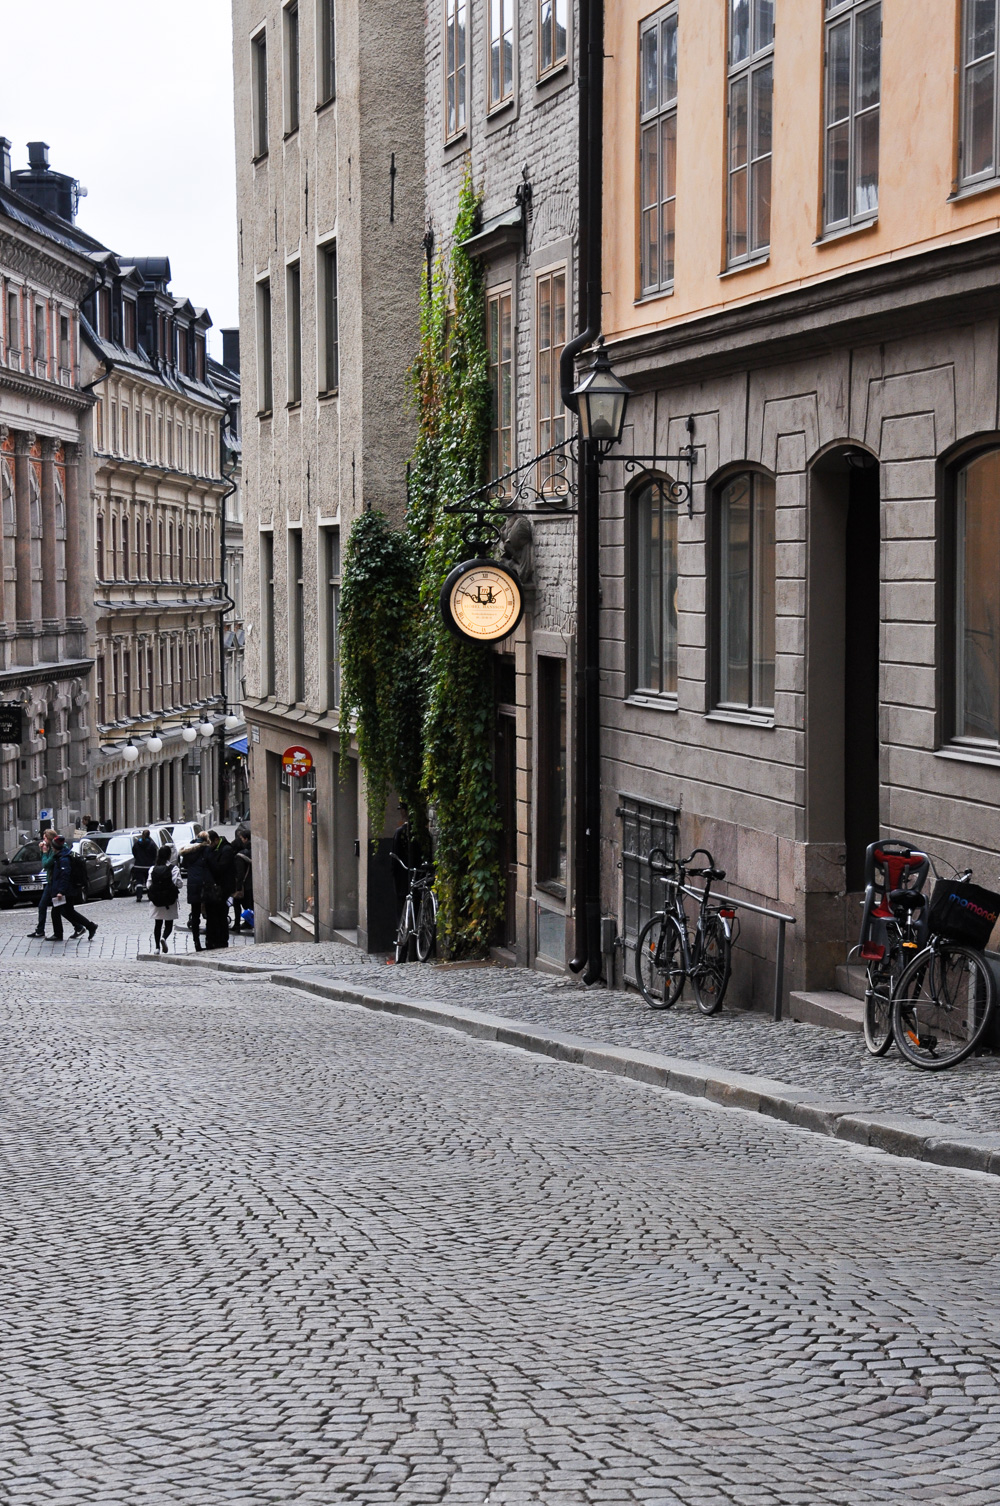 Gamla Stan, Stockholm's old town.